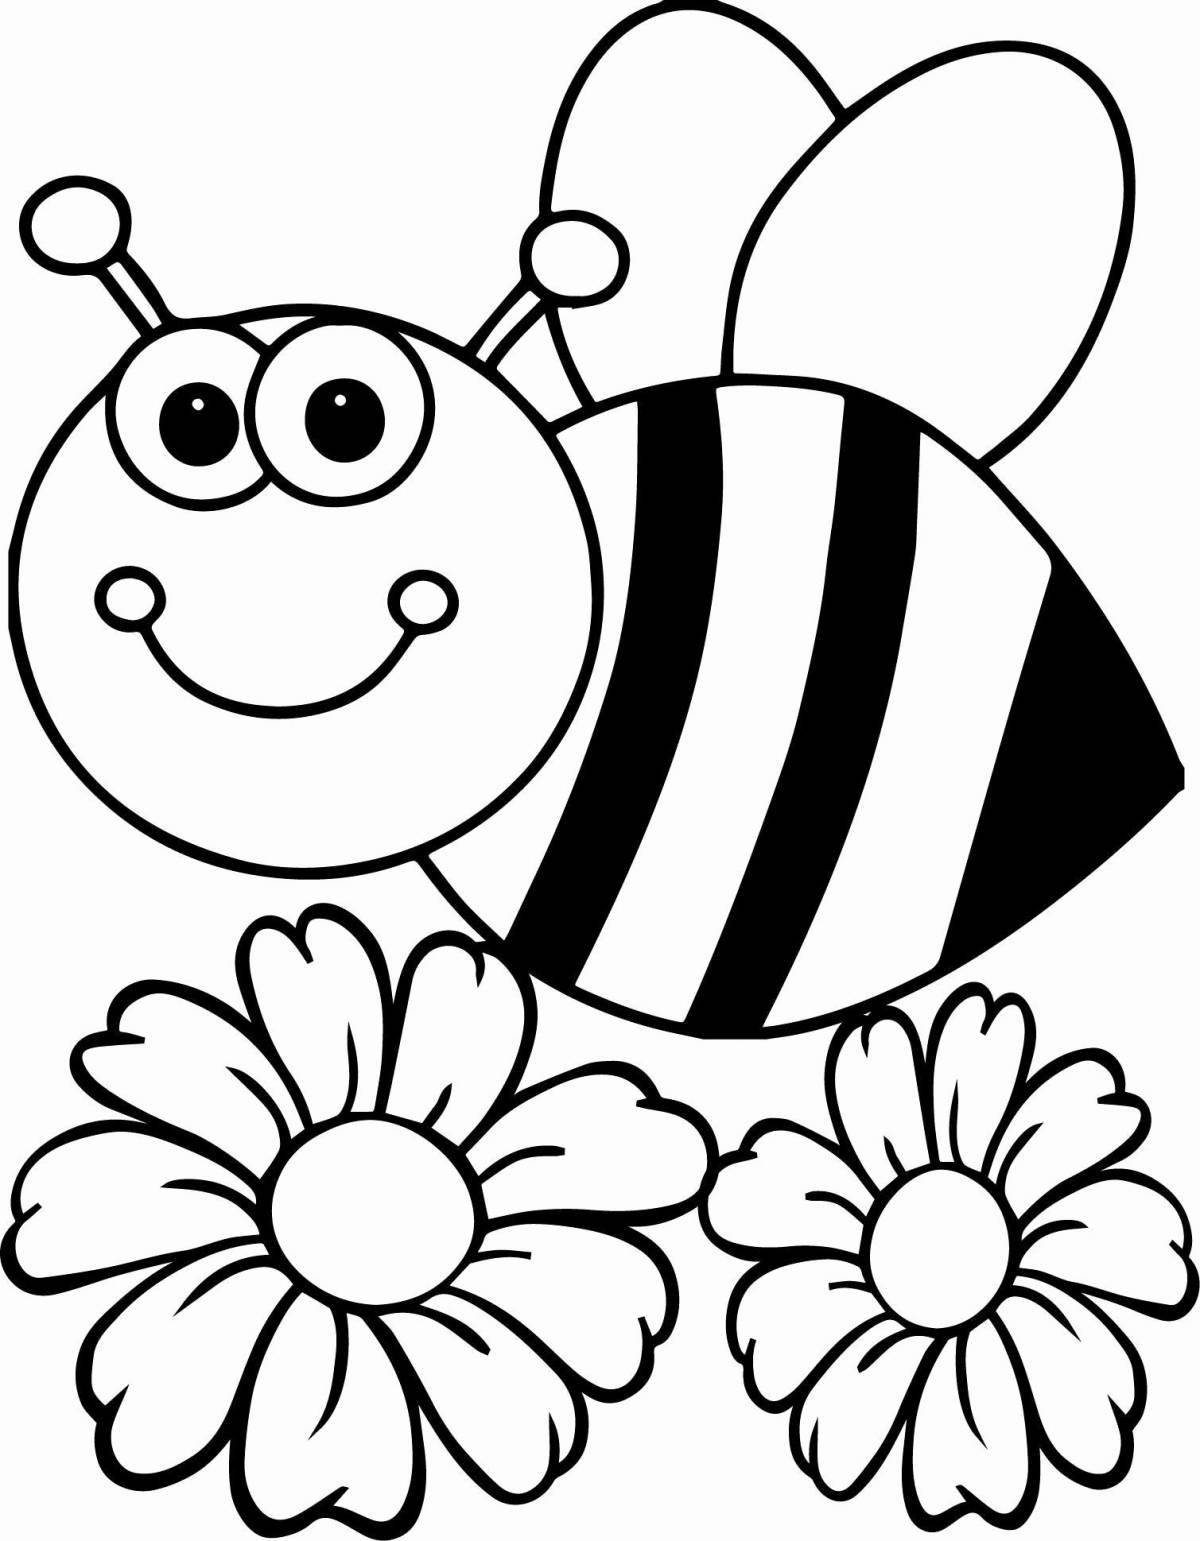 Creative bee coloring book for kids